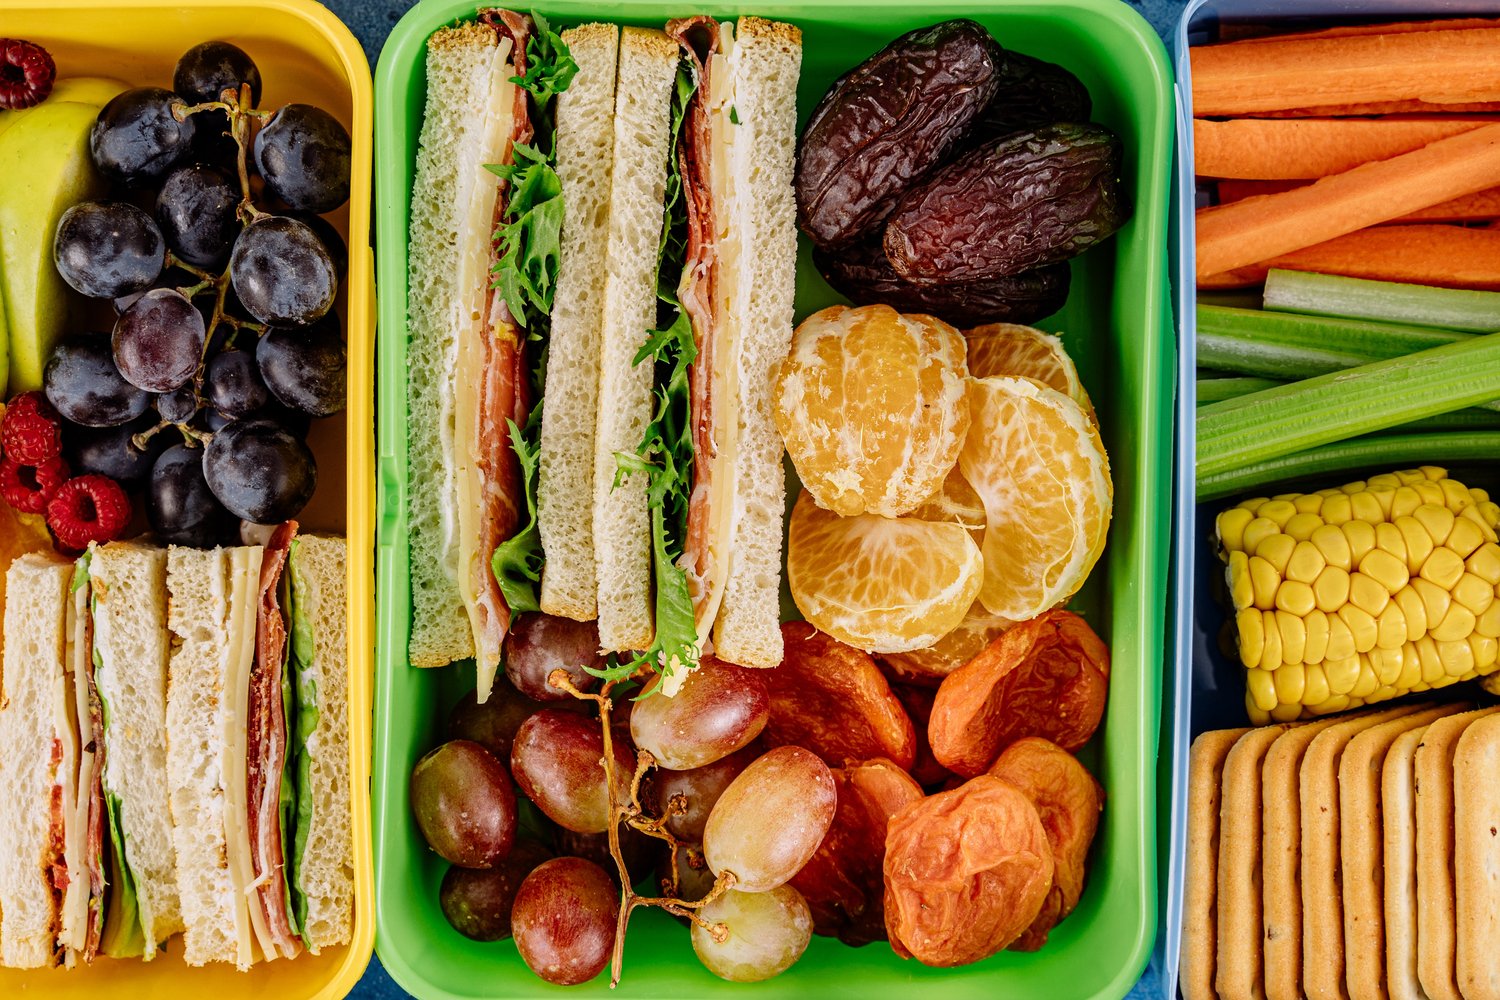 lunchbox full of healthy food including sandwich and fruits